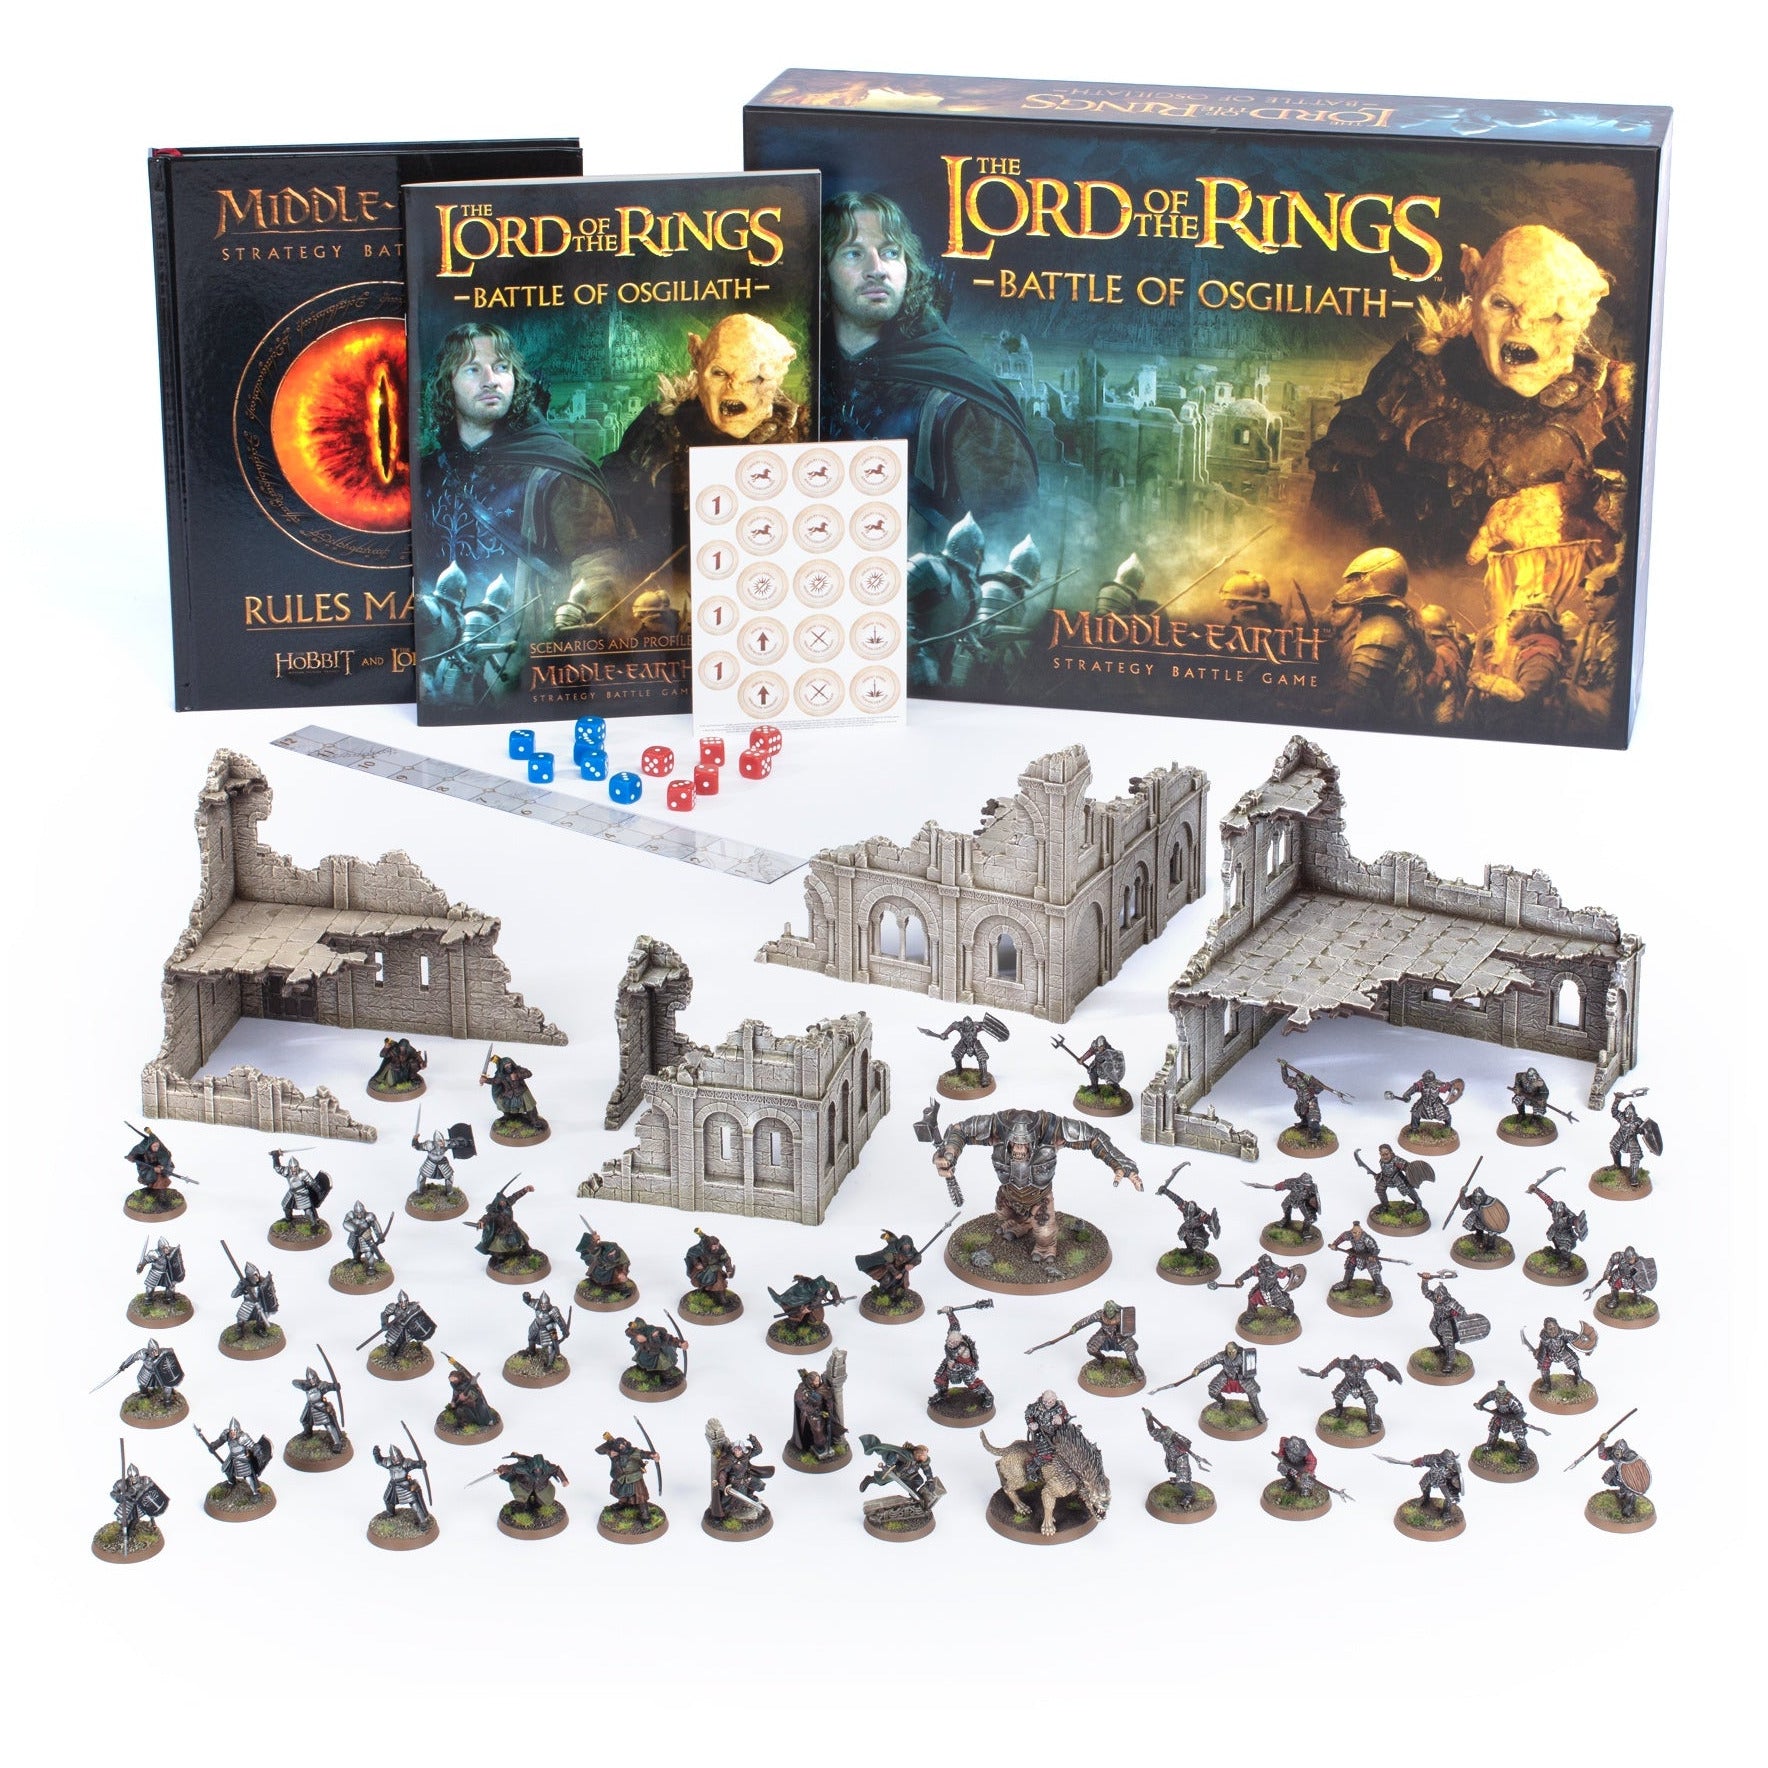 The Lord of the Rings: Battle of Osgiliath Strategy Battle Game